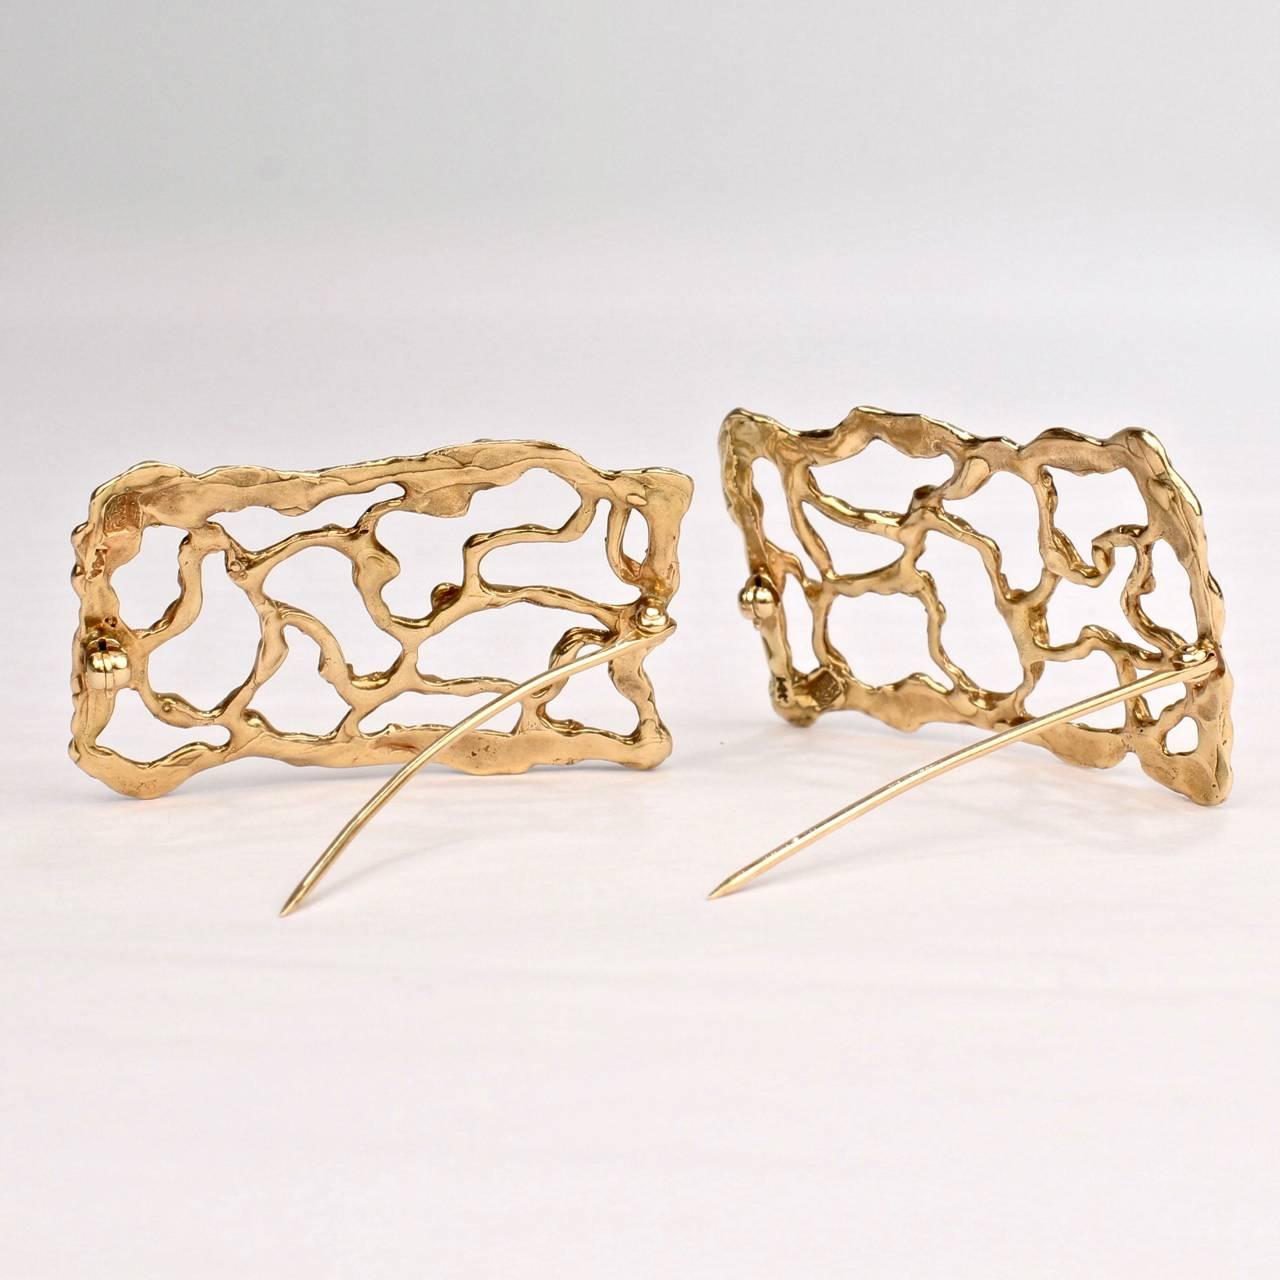 Pair of Artist Signed 14-Karat Gold Brutalist Brooches or Pins 1